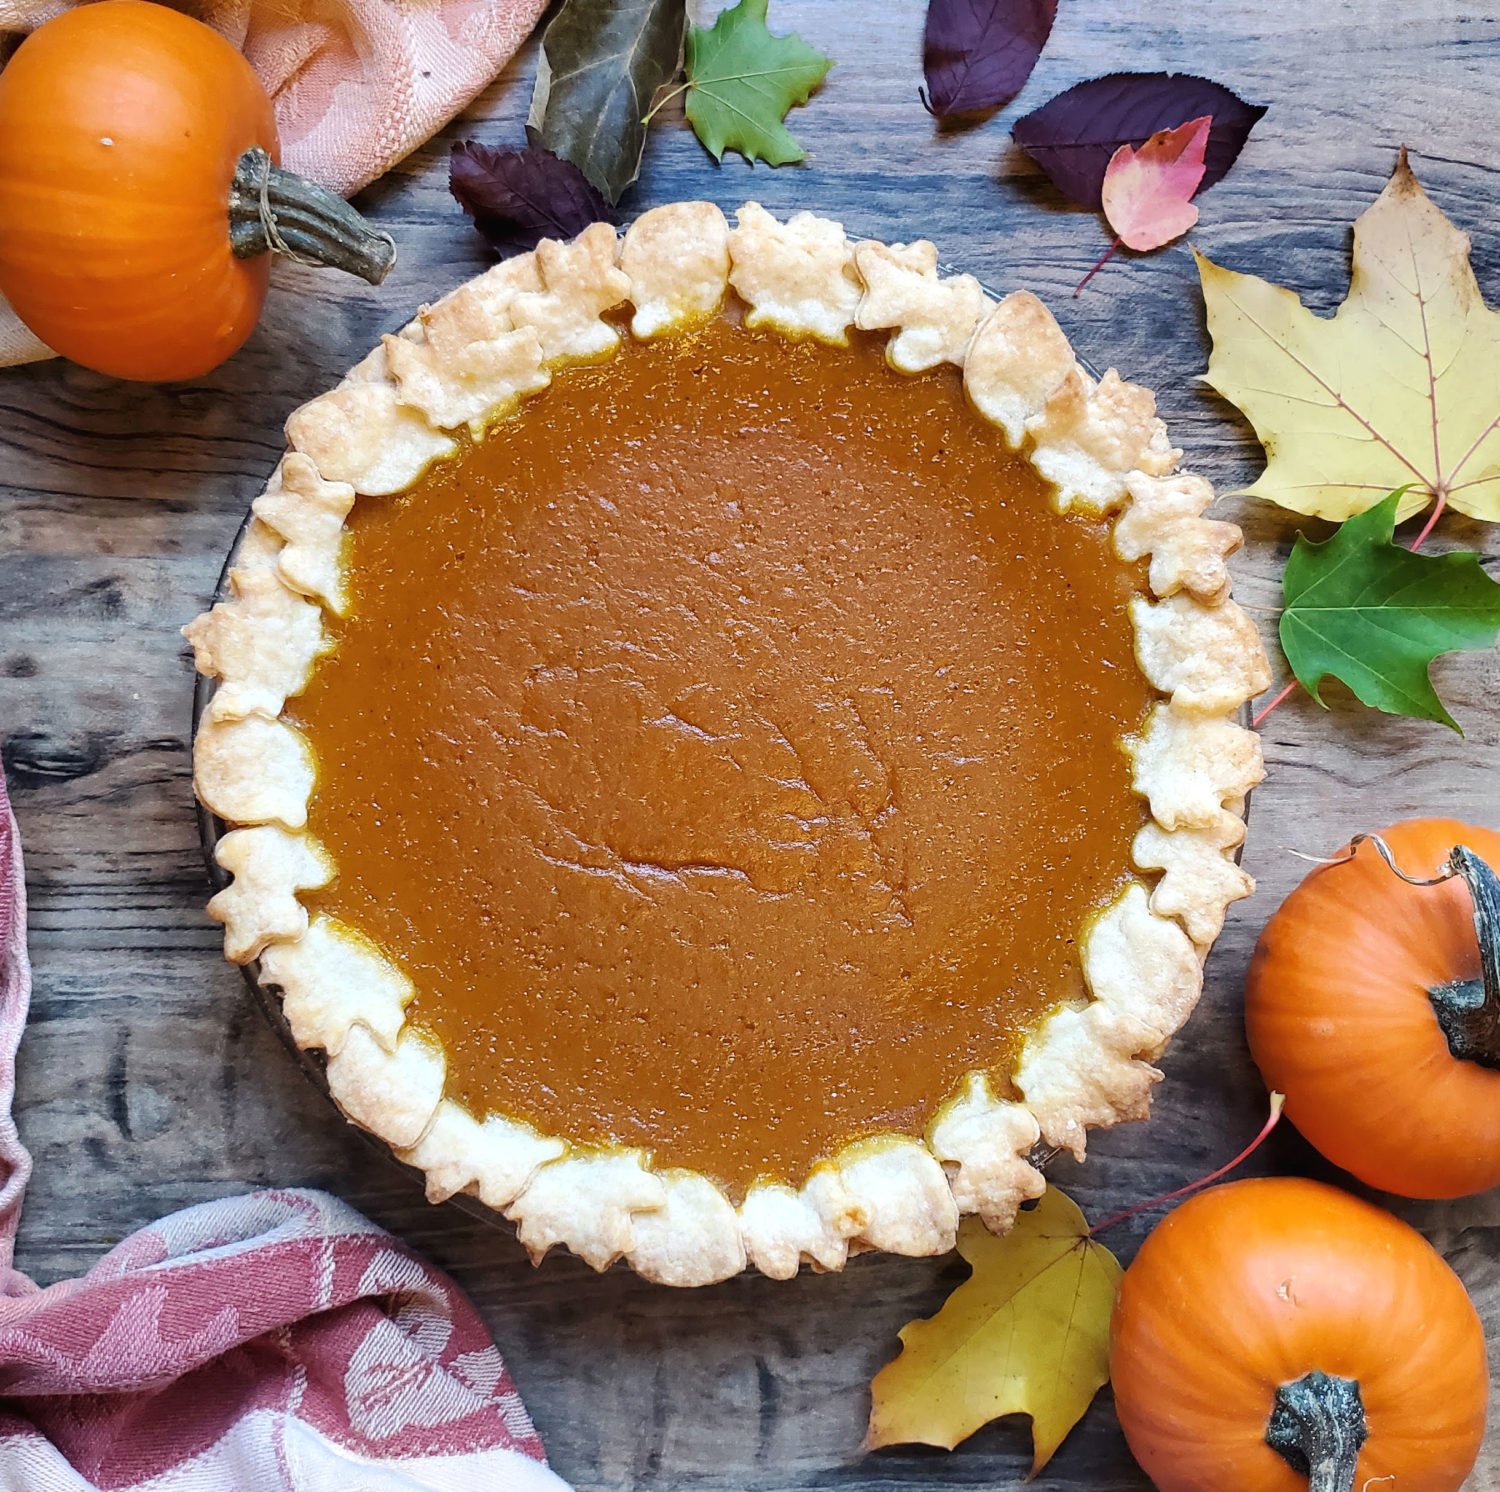 Jazz up your pumpkin pie game with a new spice (mace), more eggs, and you never have to worry about not having evaporated milk on hand again.